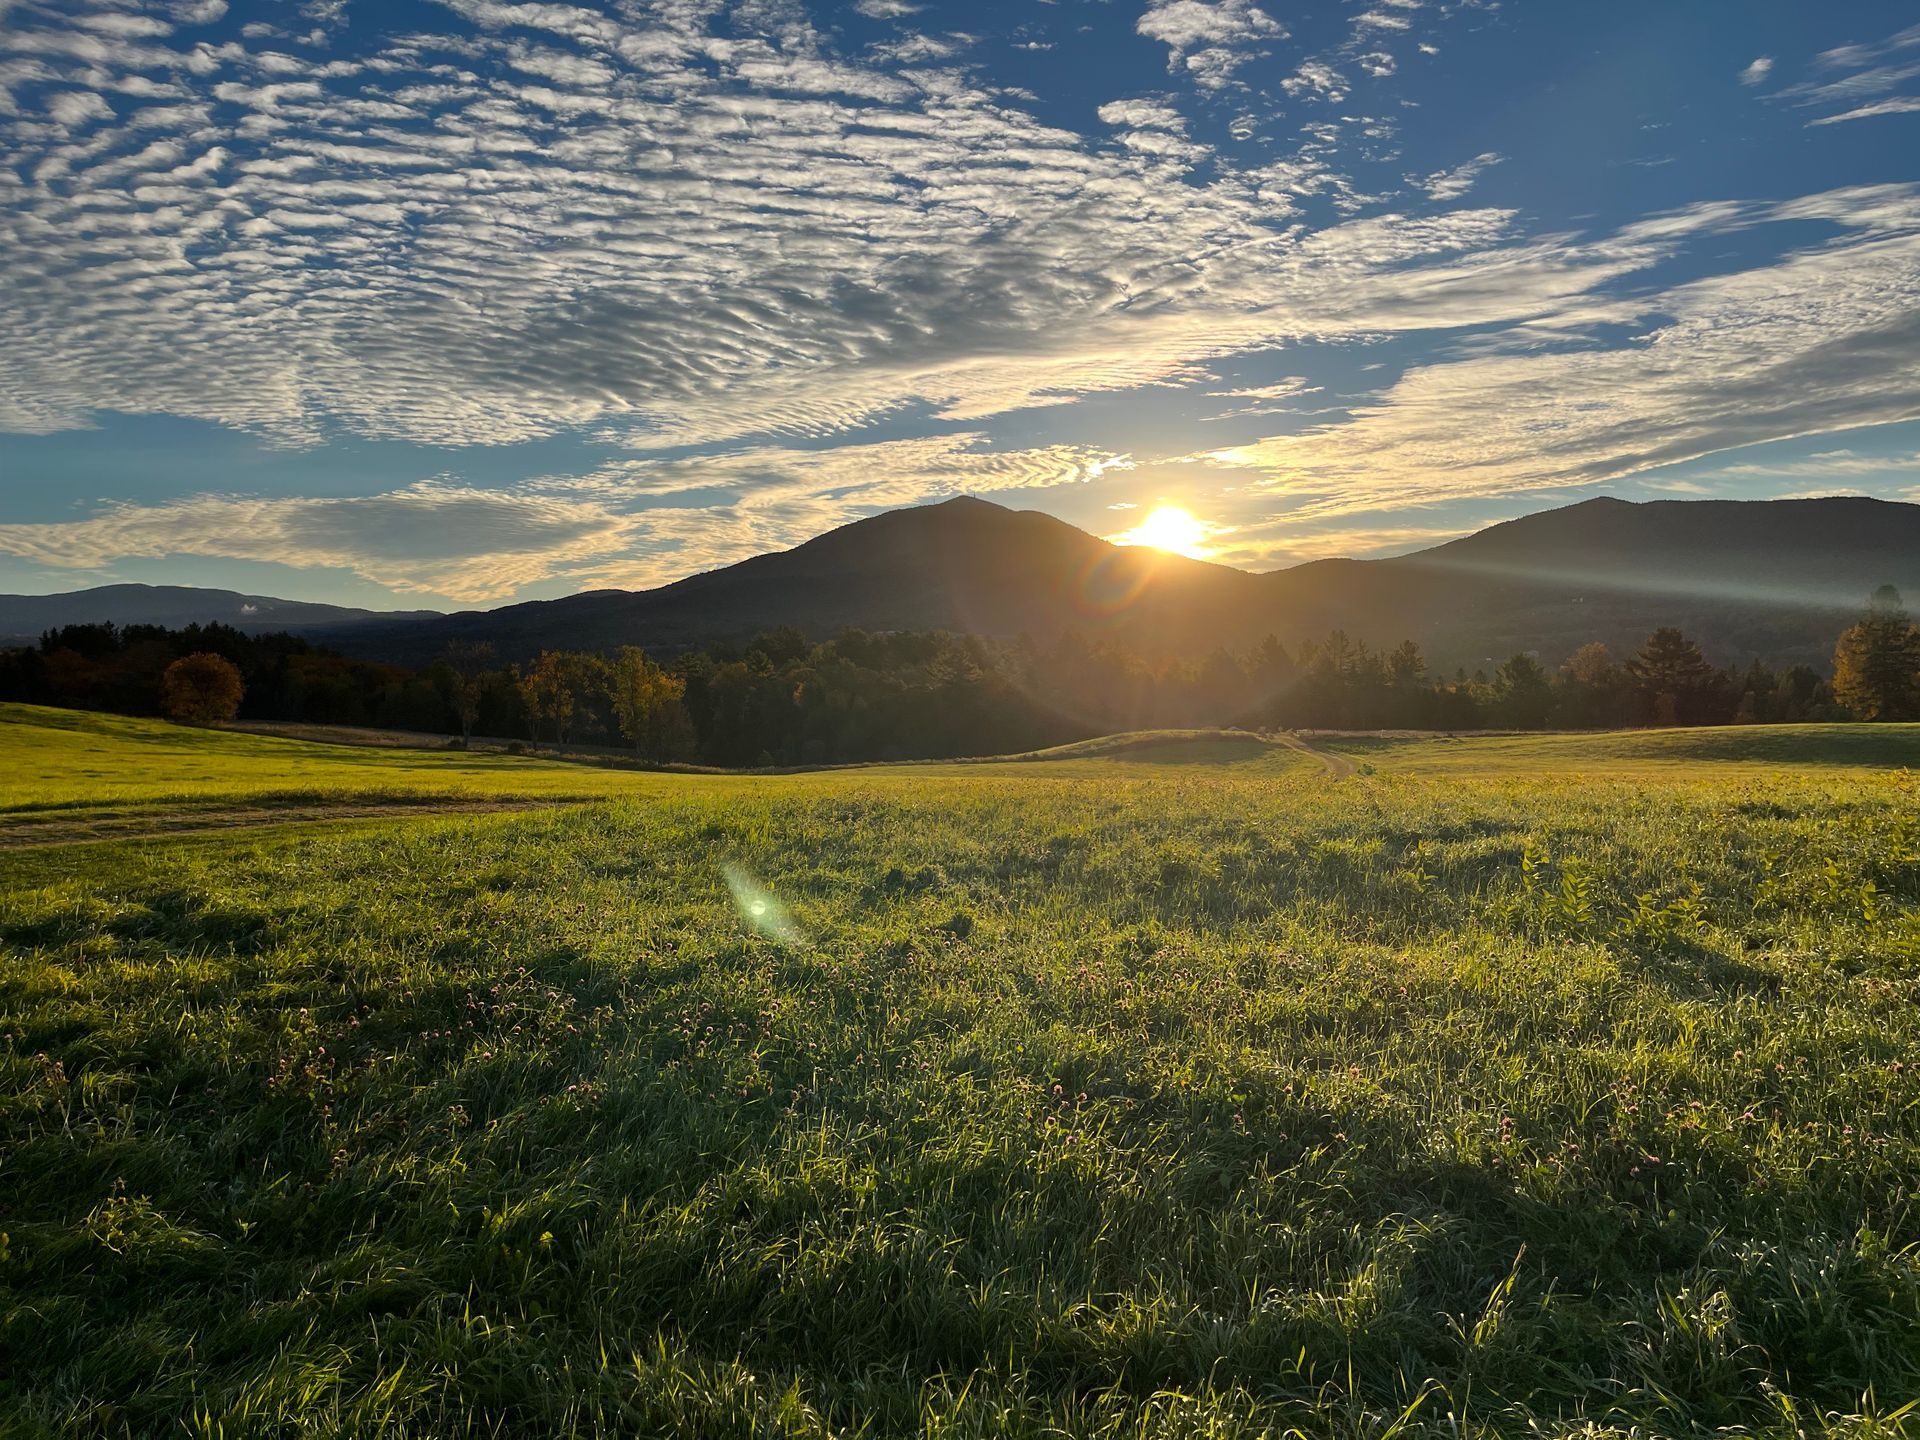 View of Burke Mountain past a green field at sunset